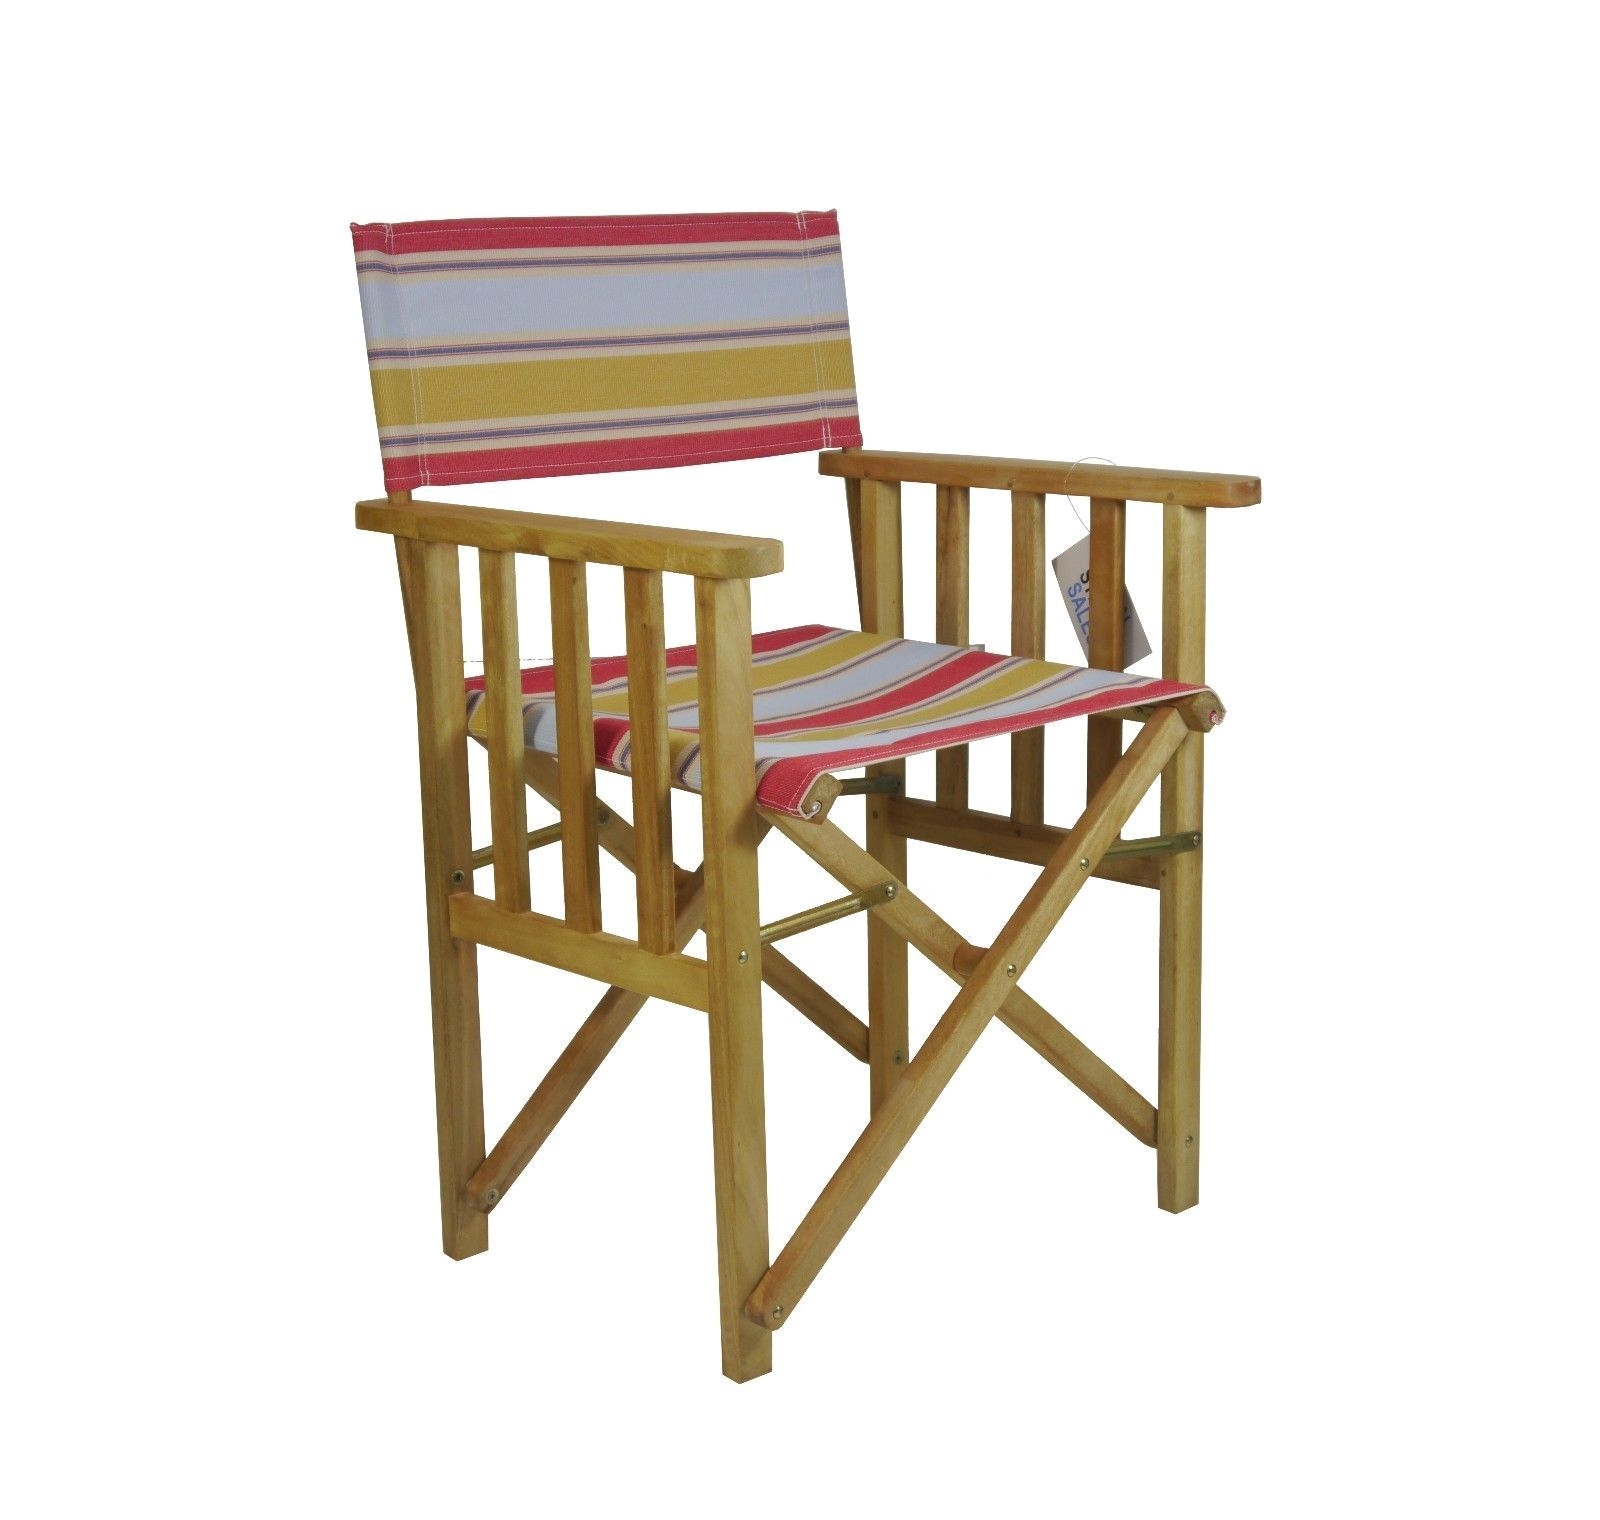 directors outdoor folding deck chair timber structured lime